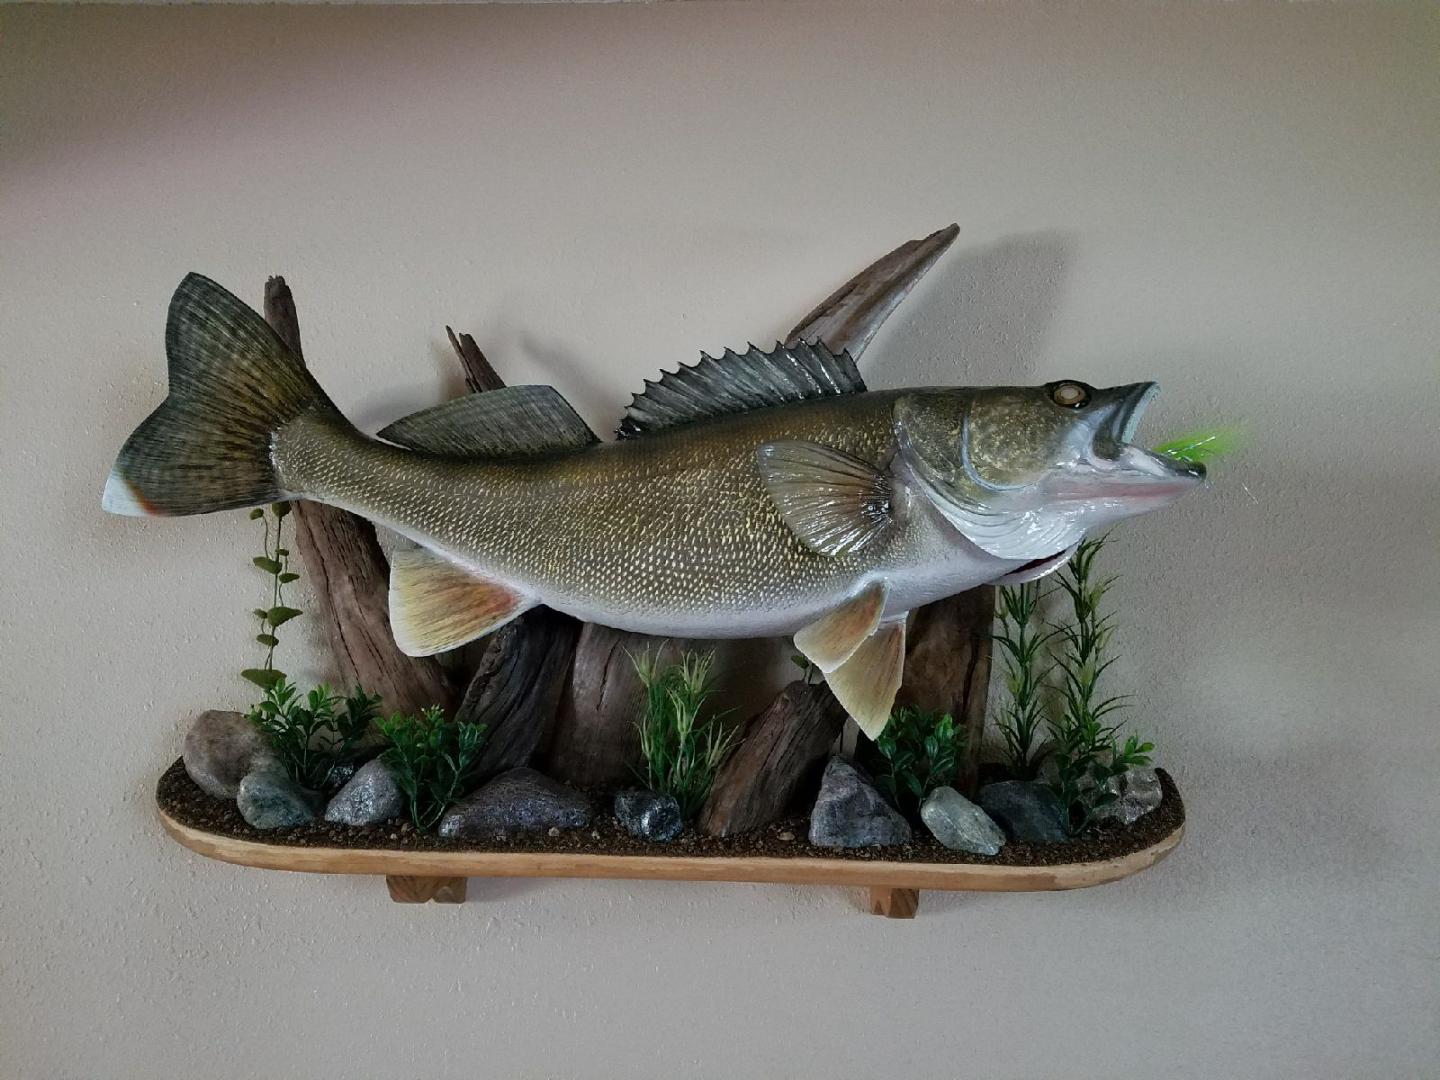 Walleye Replica - General Discussion Forum - General Discussion